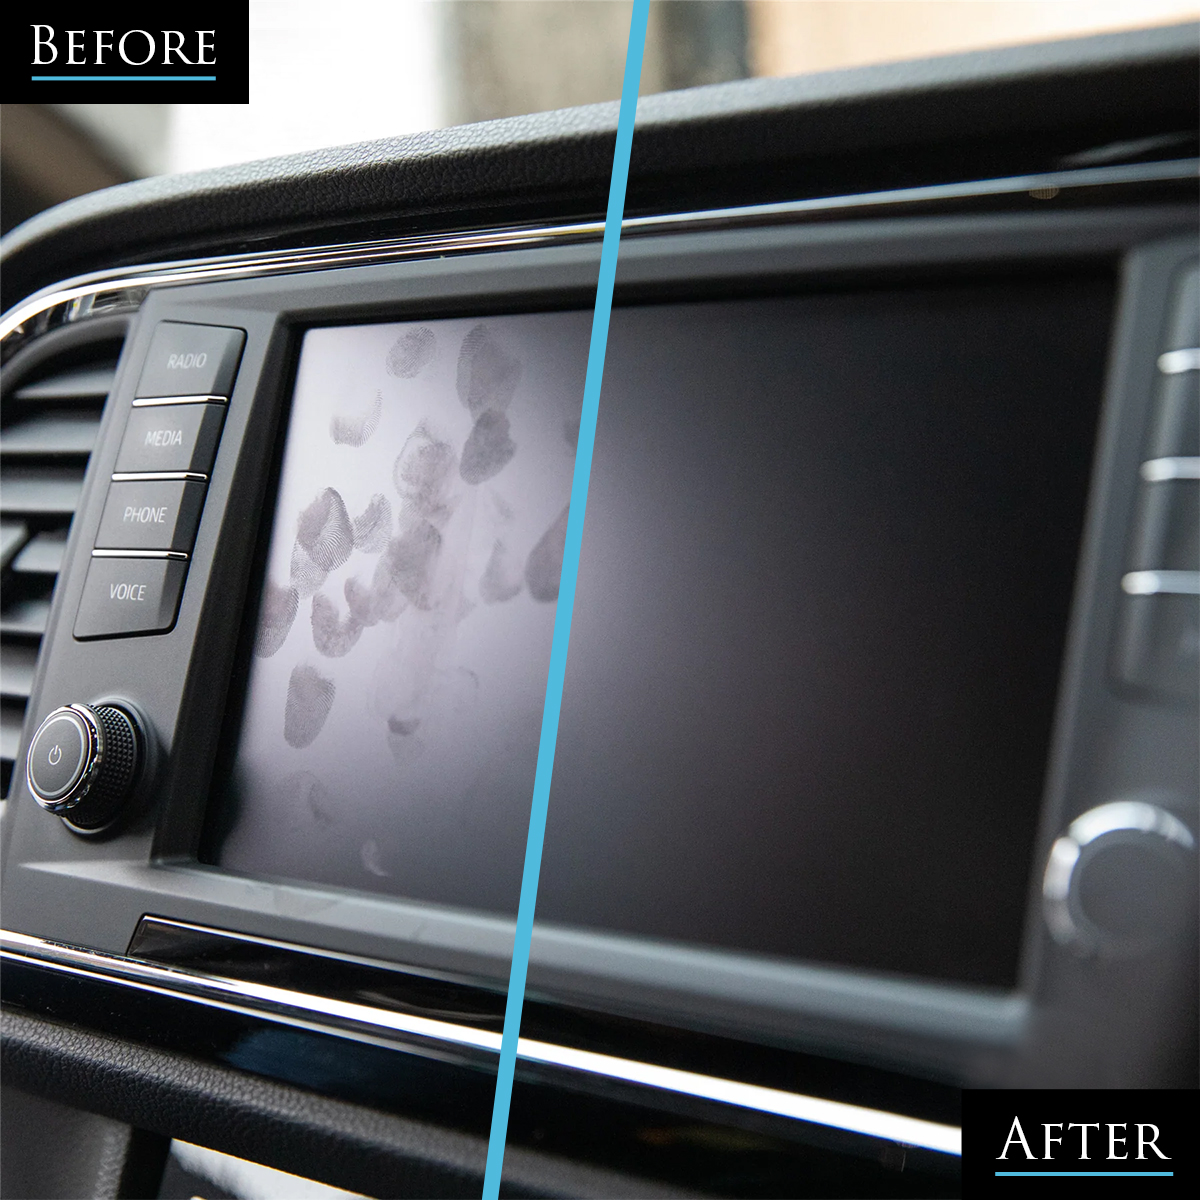 Image shows before & after of using Car Gods Glass Perfection. Before shows a car’s touch screen interface covered in finger marks. After shows a clean touch screen interface.